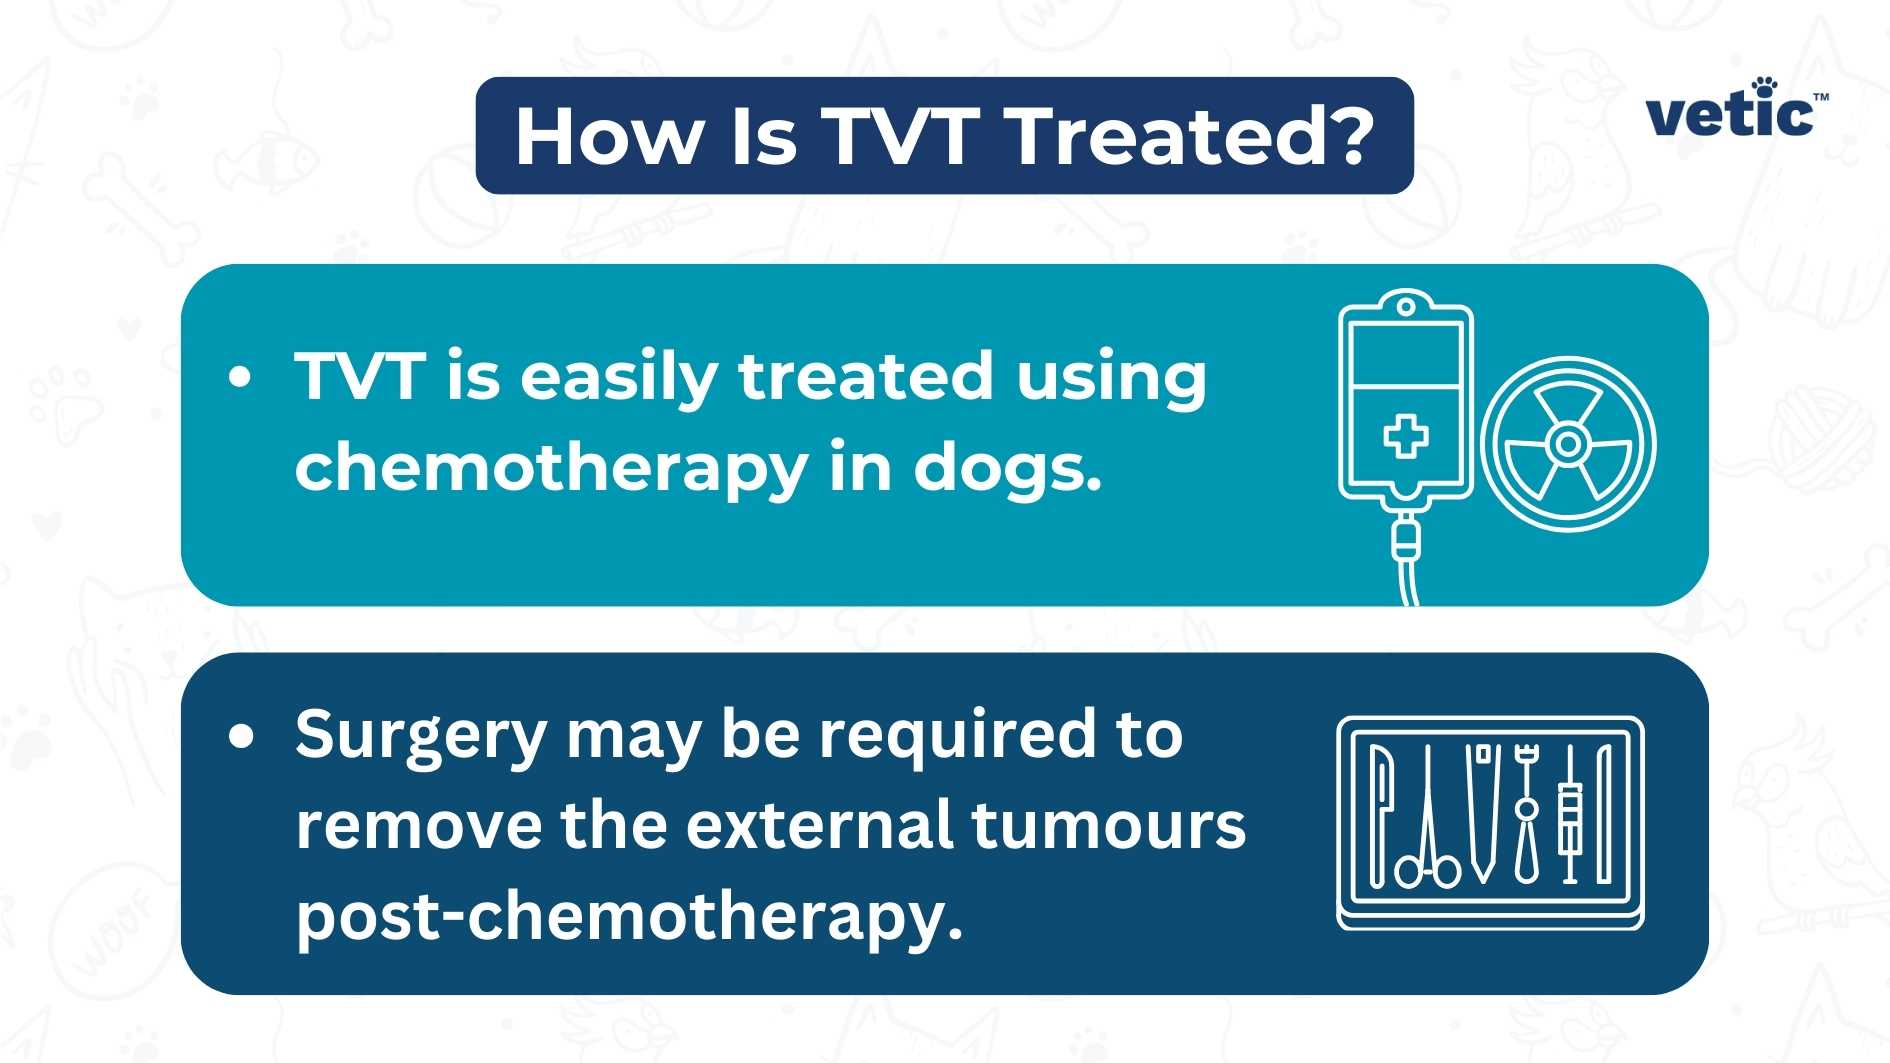 Infographic by vetic on how TVT is treated in dogs. The conventional treatment procedures of TVT include TVT is easily treated using chemotherapy in dogs. Surgery may be required to remove the external tumours post-chemotherapy.